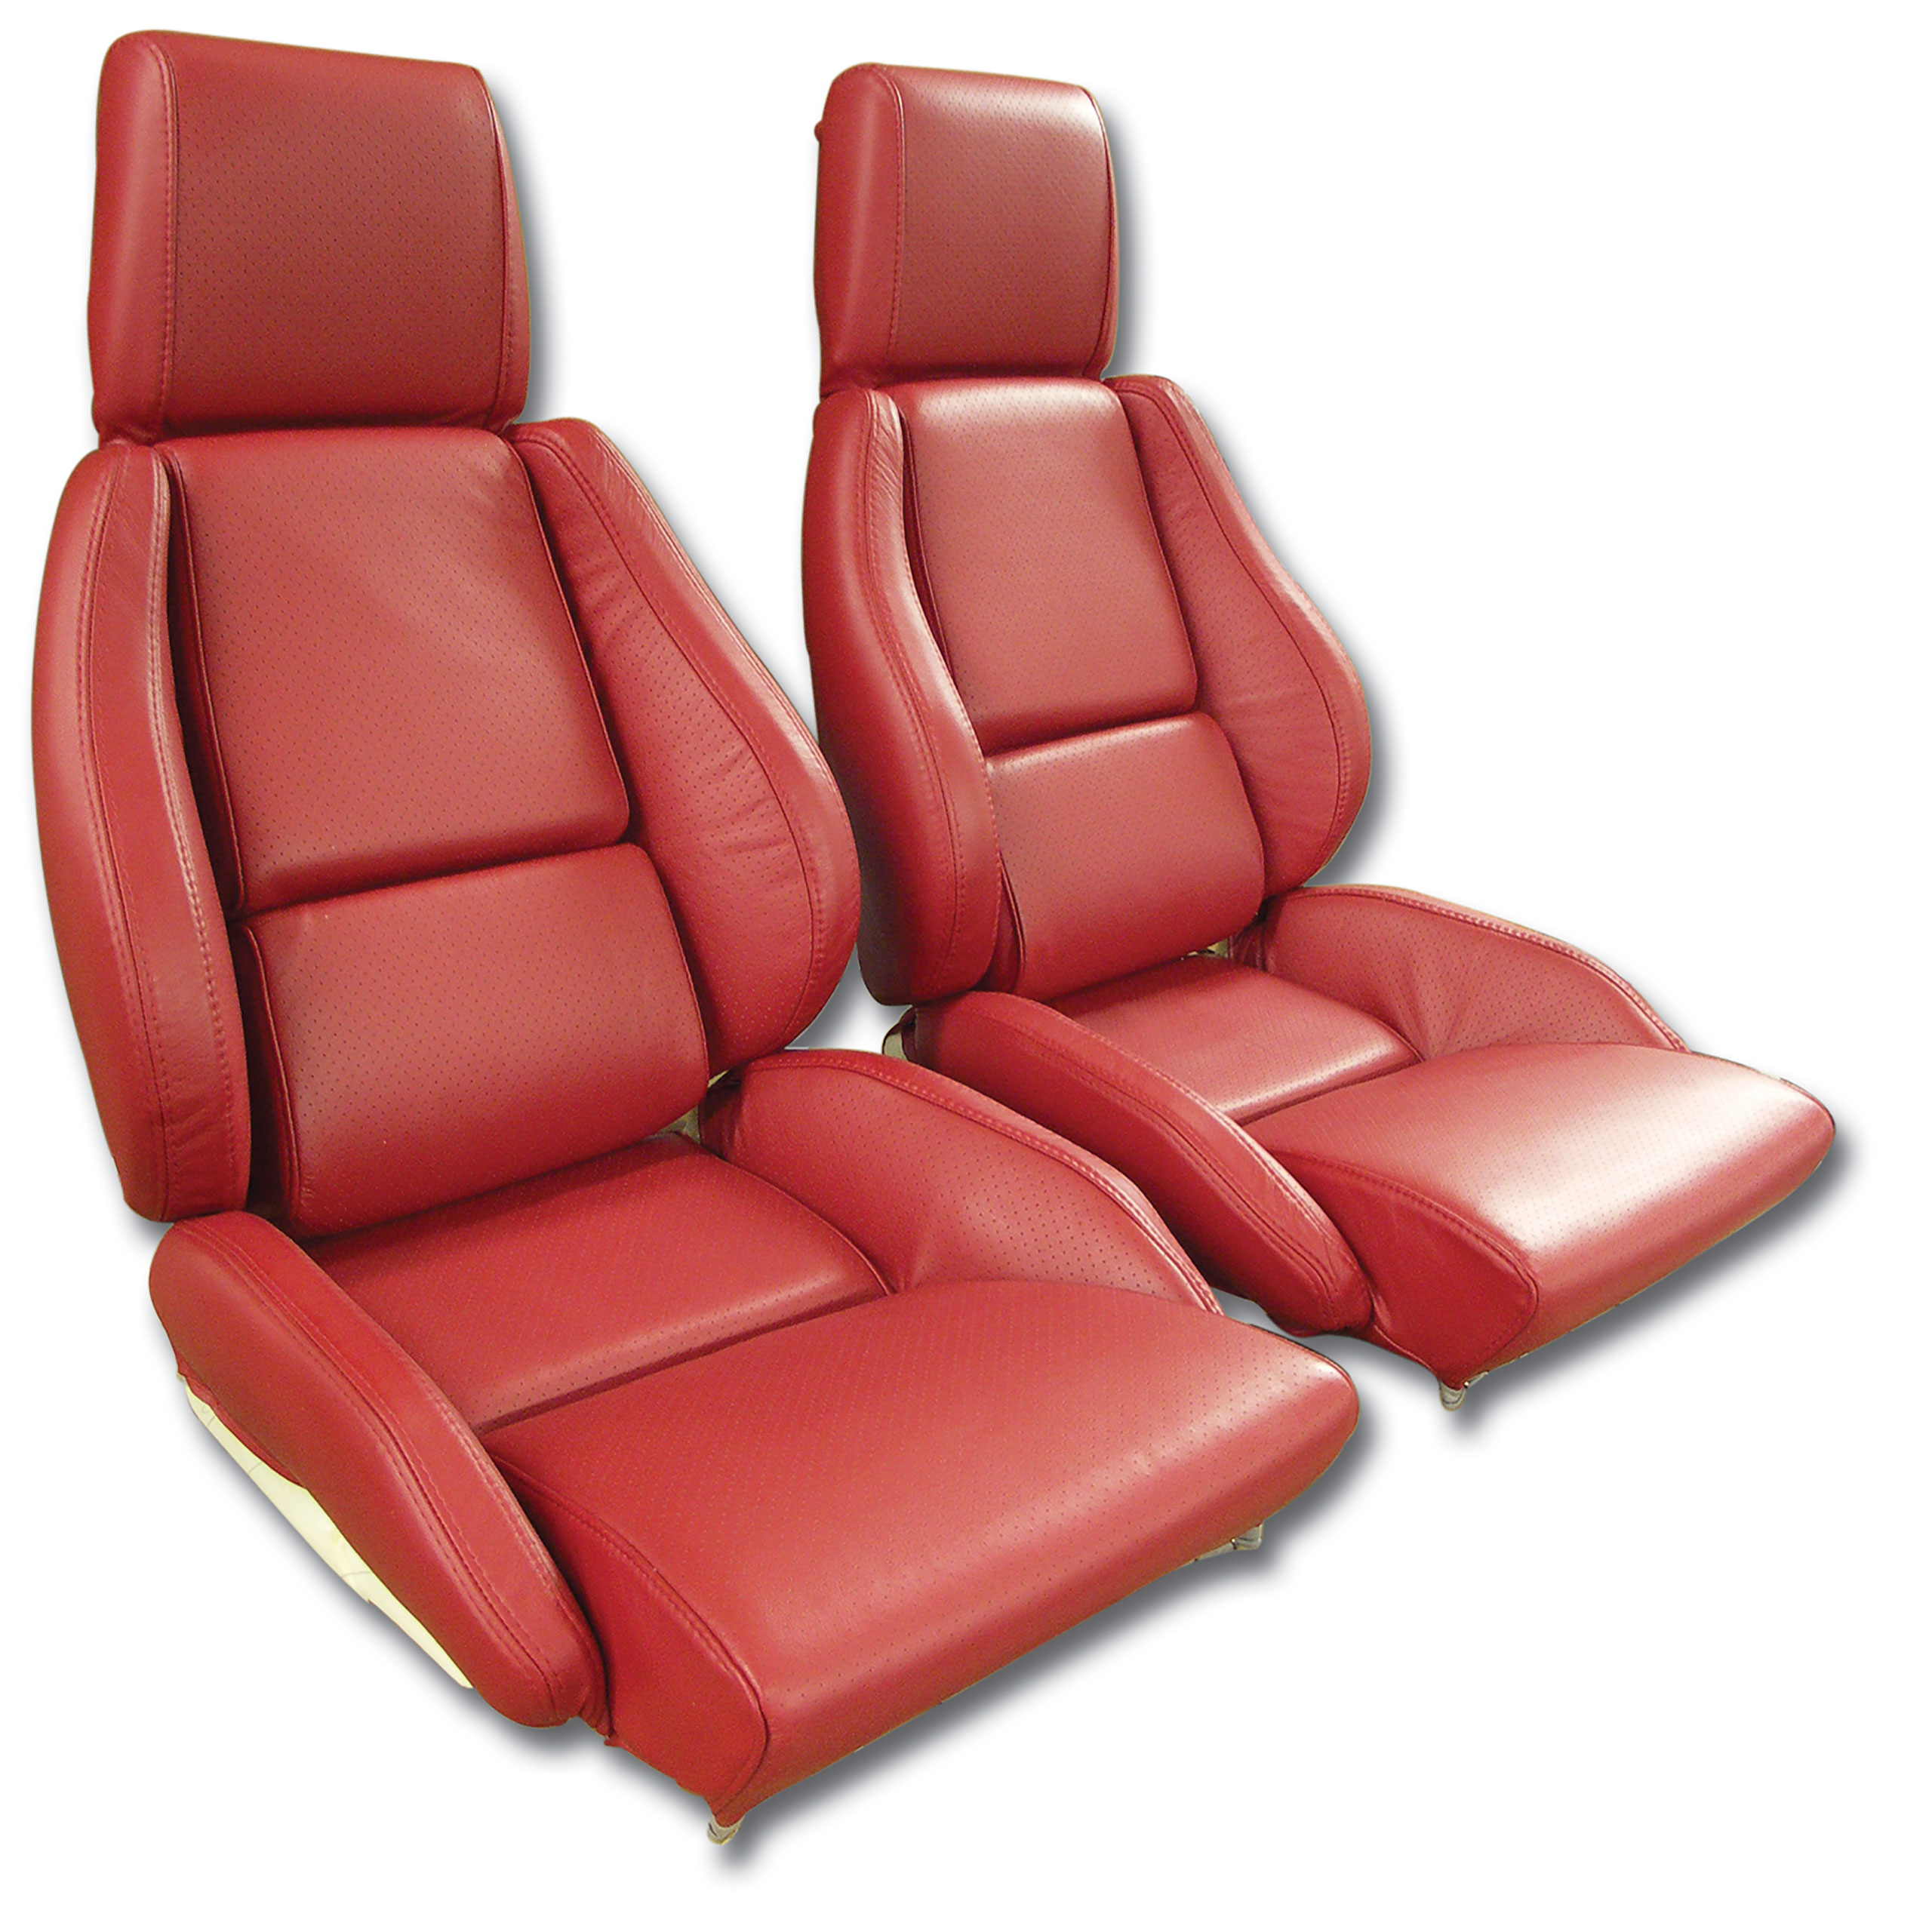 1986-1988 C4 Corvette Mounted Leather Seat Covers Red Standard